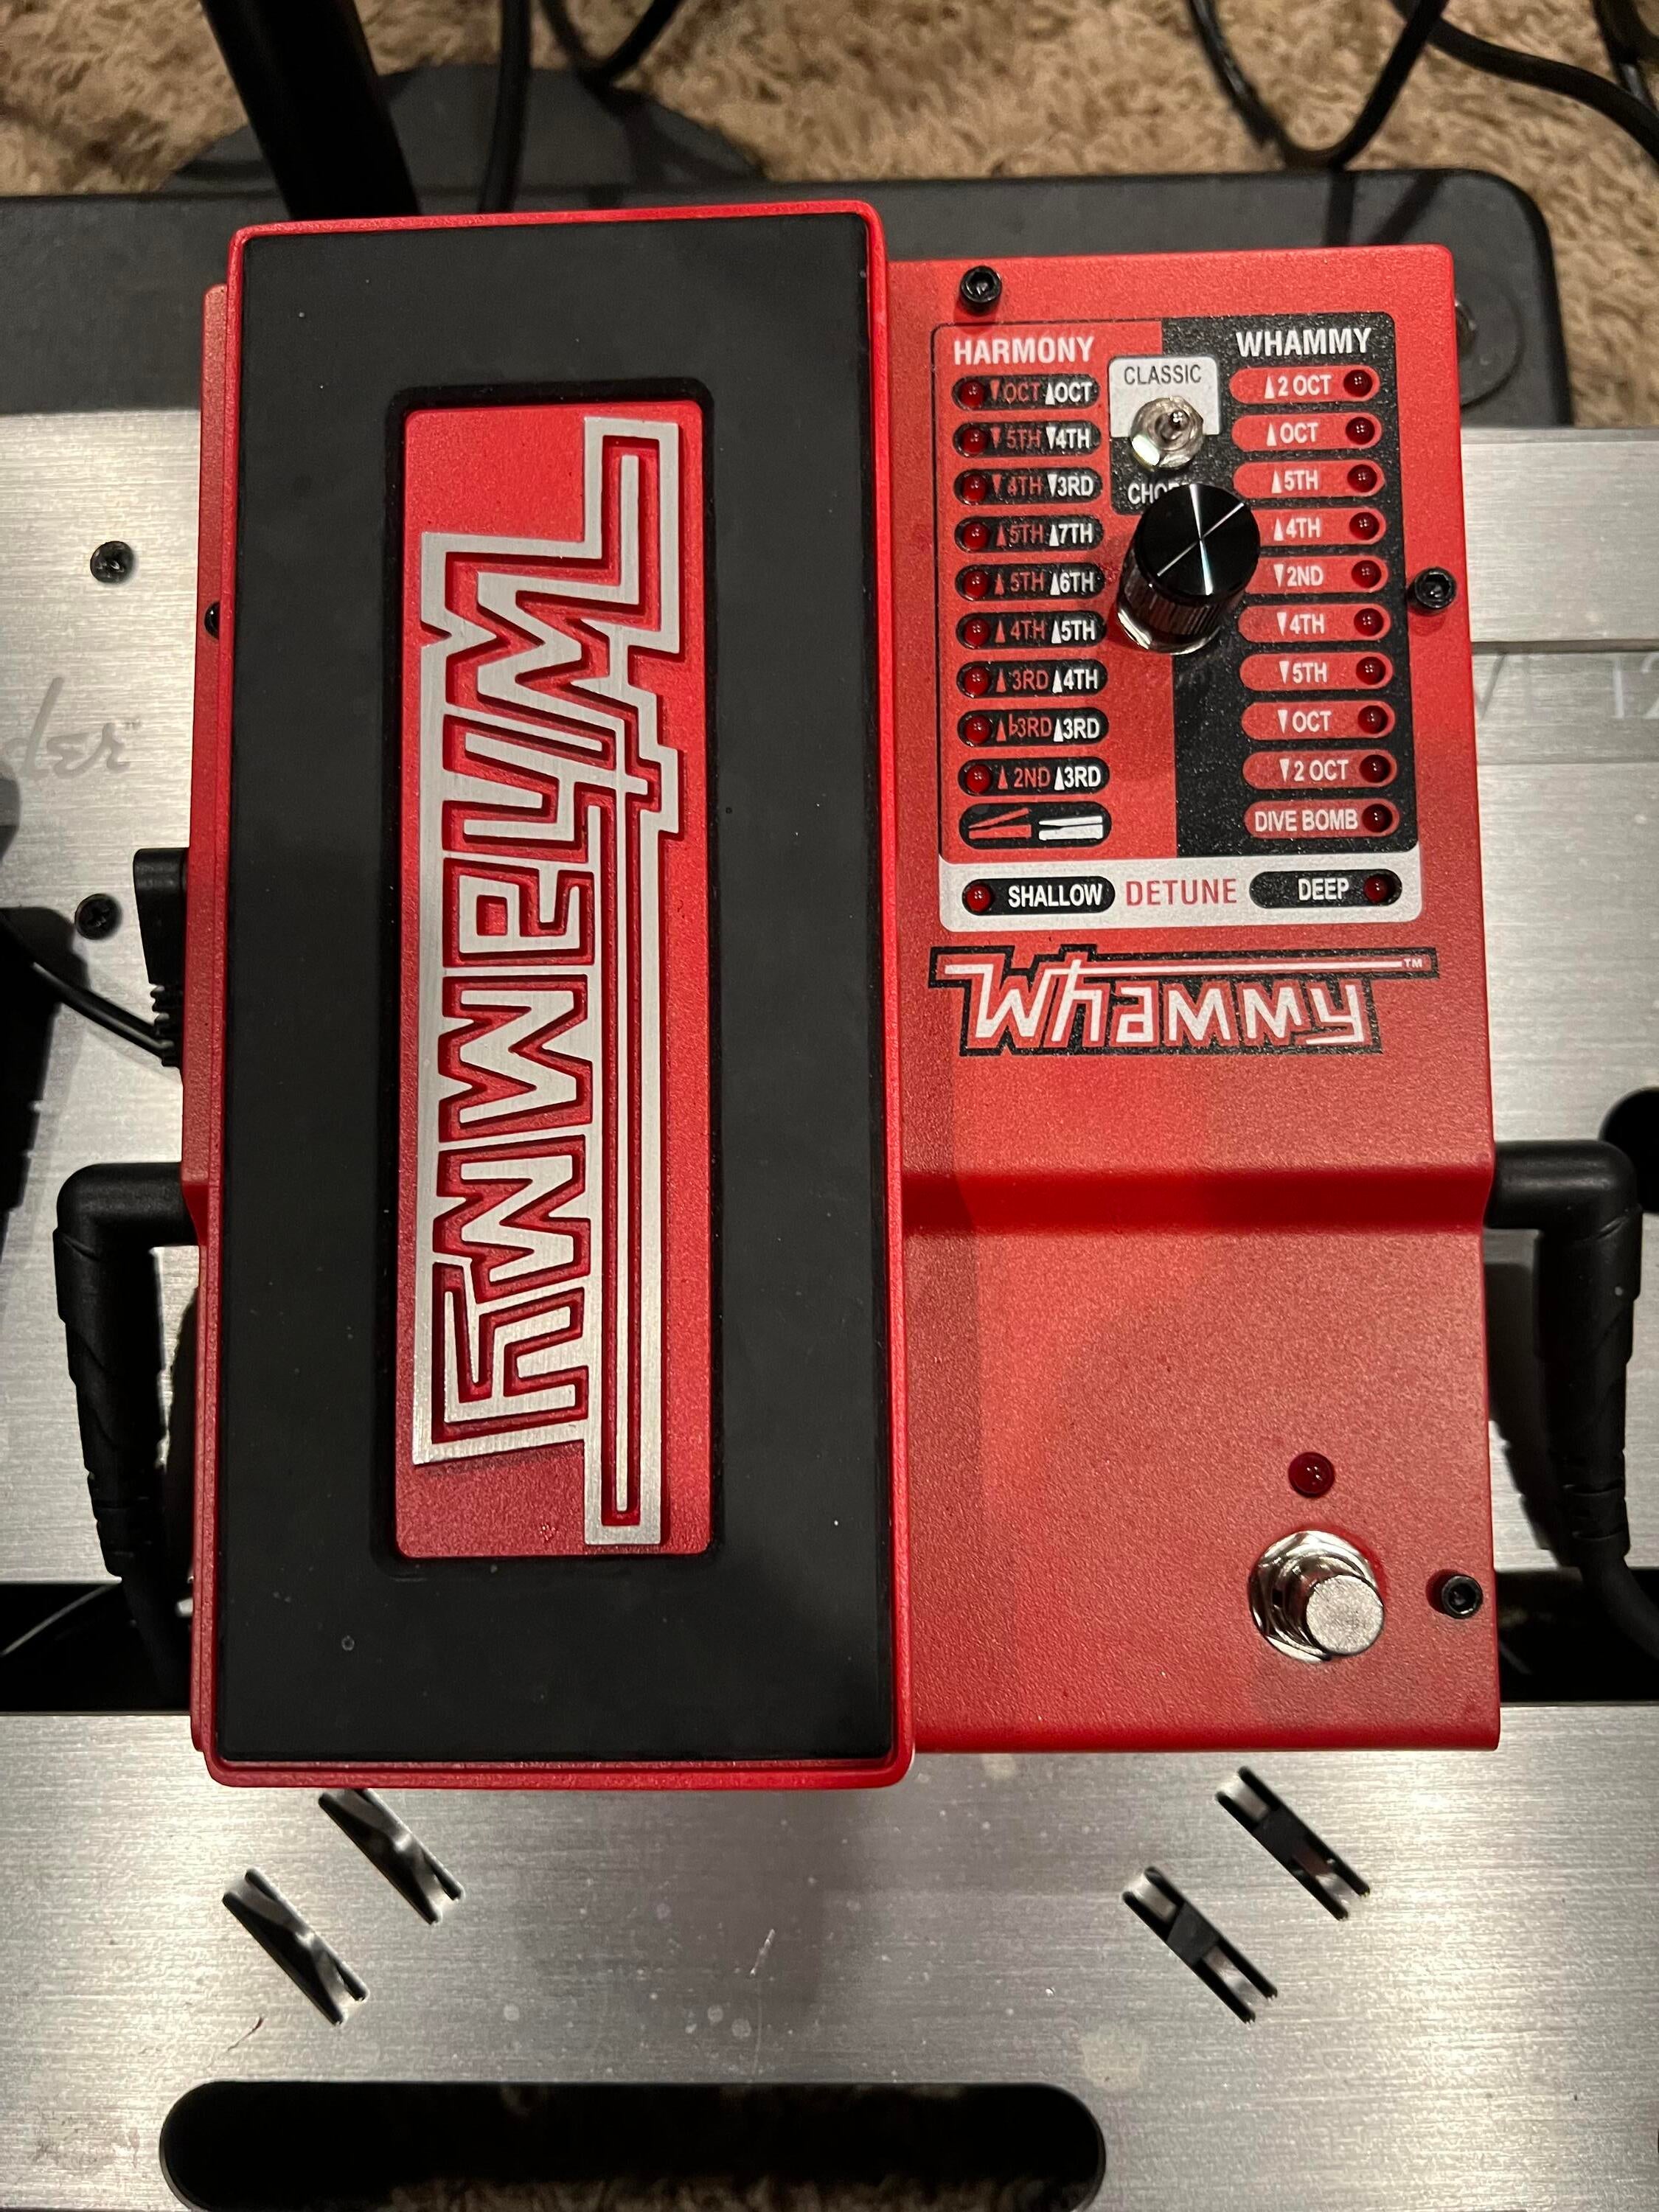 Used Digitech Whammy 5 Pitch Shift Pedal - Sweetwater's Gear Exchange